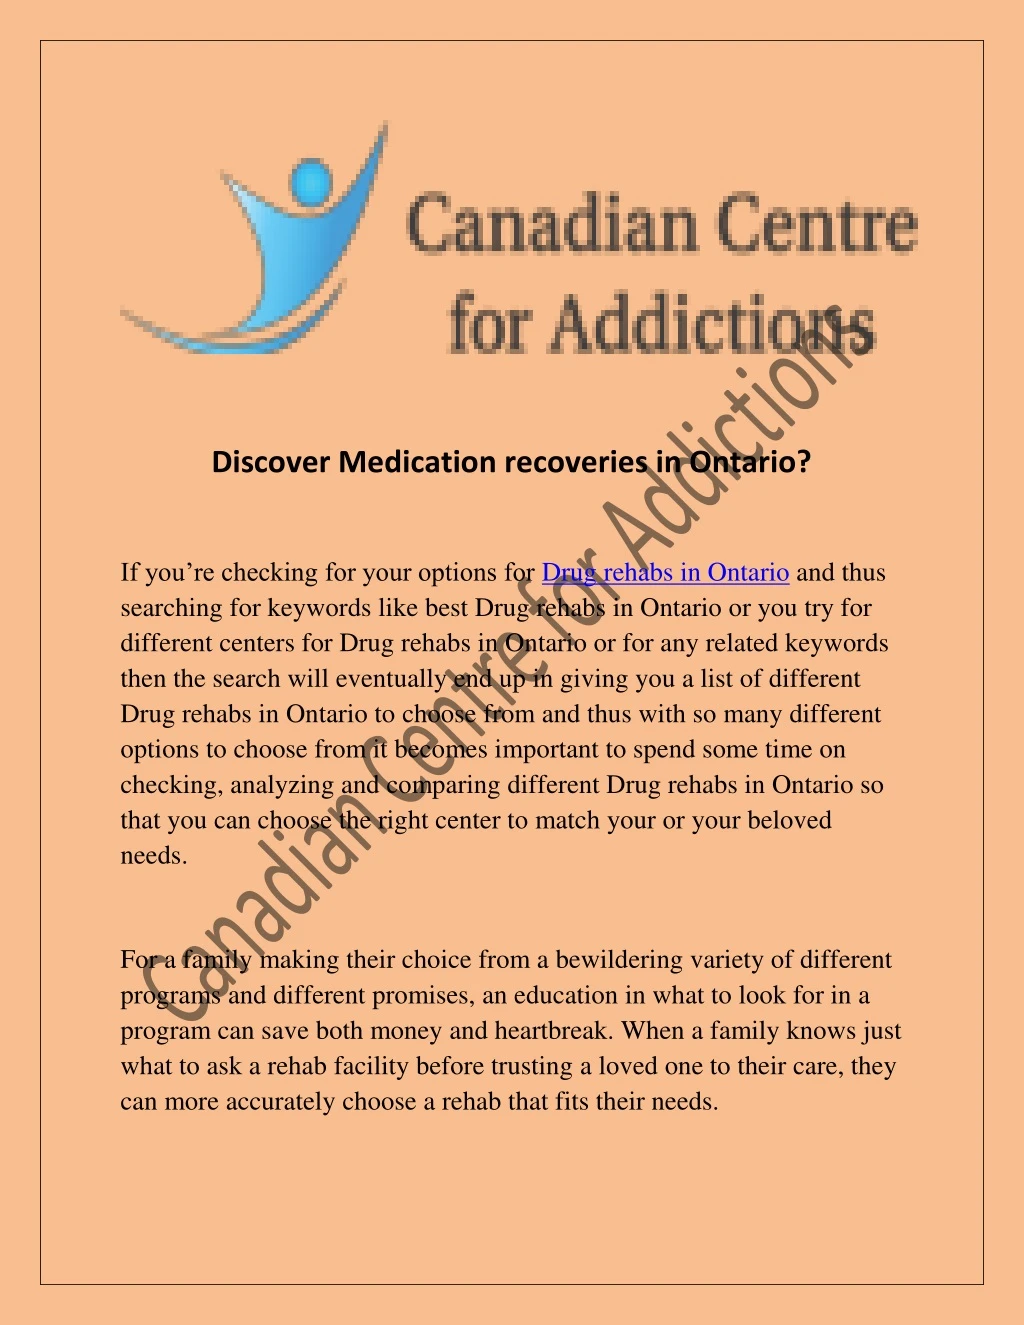 discover medication recoveries in ontario